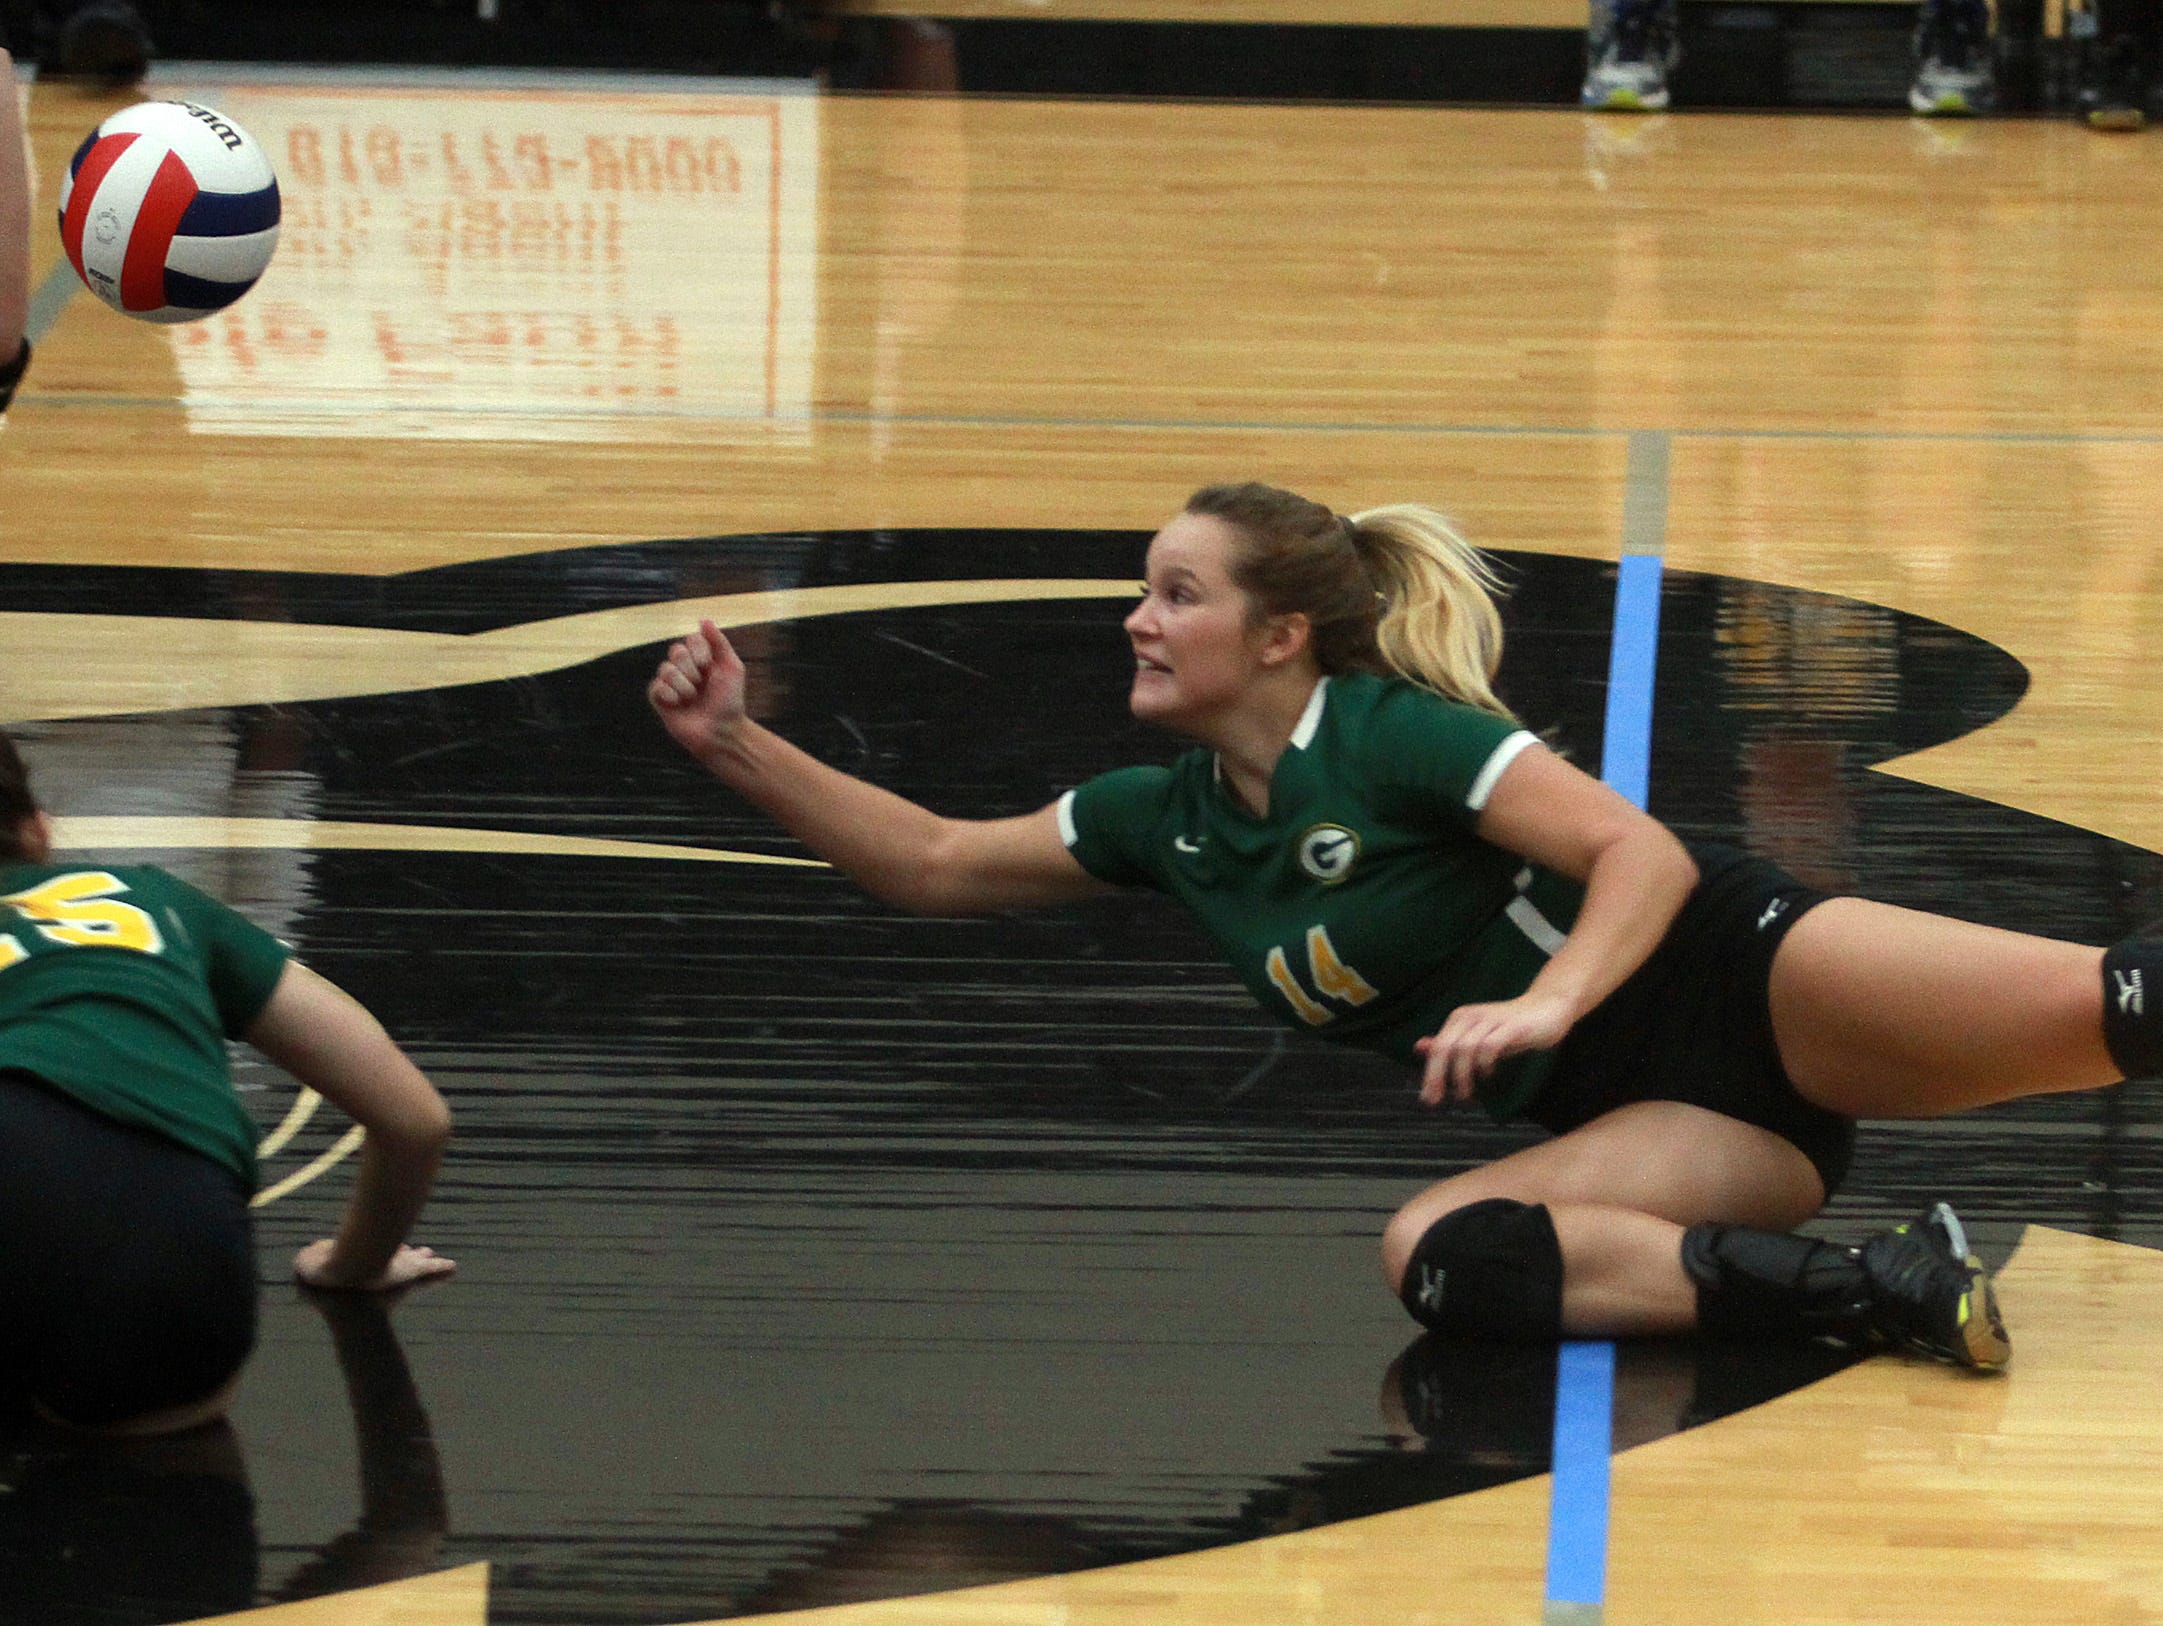 Gallatin's Haley Bowling dives to make a save against Mt. Juliet during Monday's District 9-AAA Tournament quarterfinals.